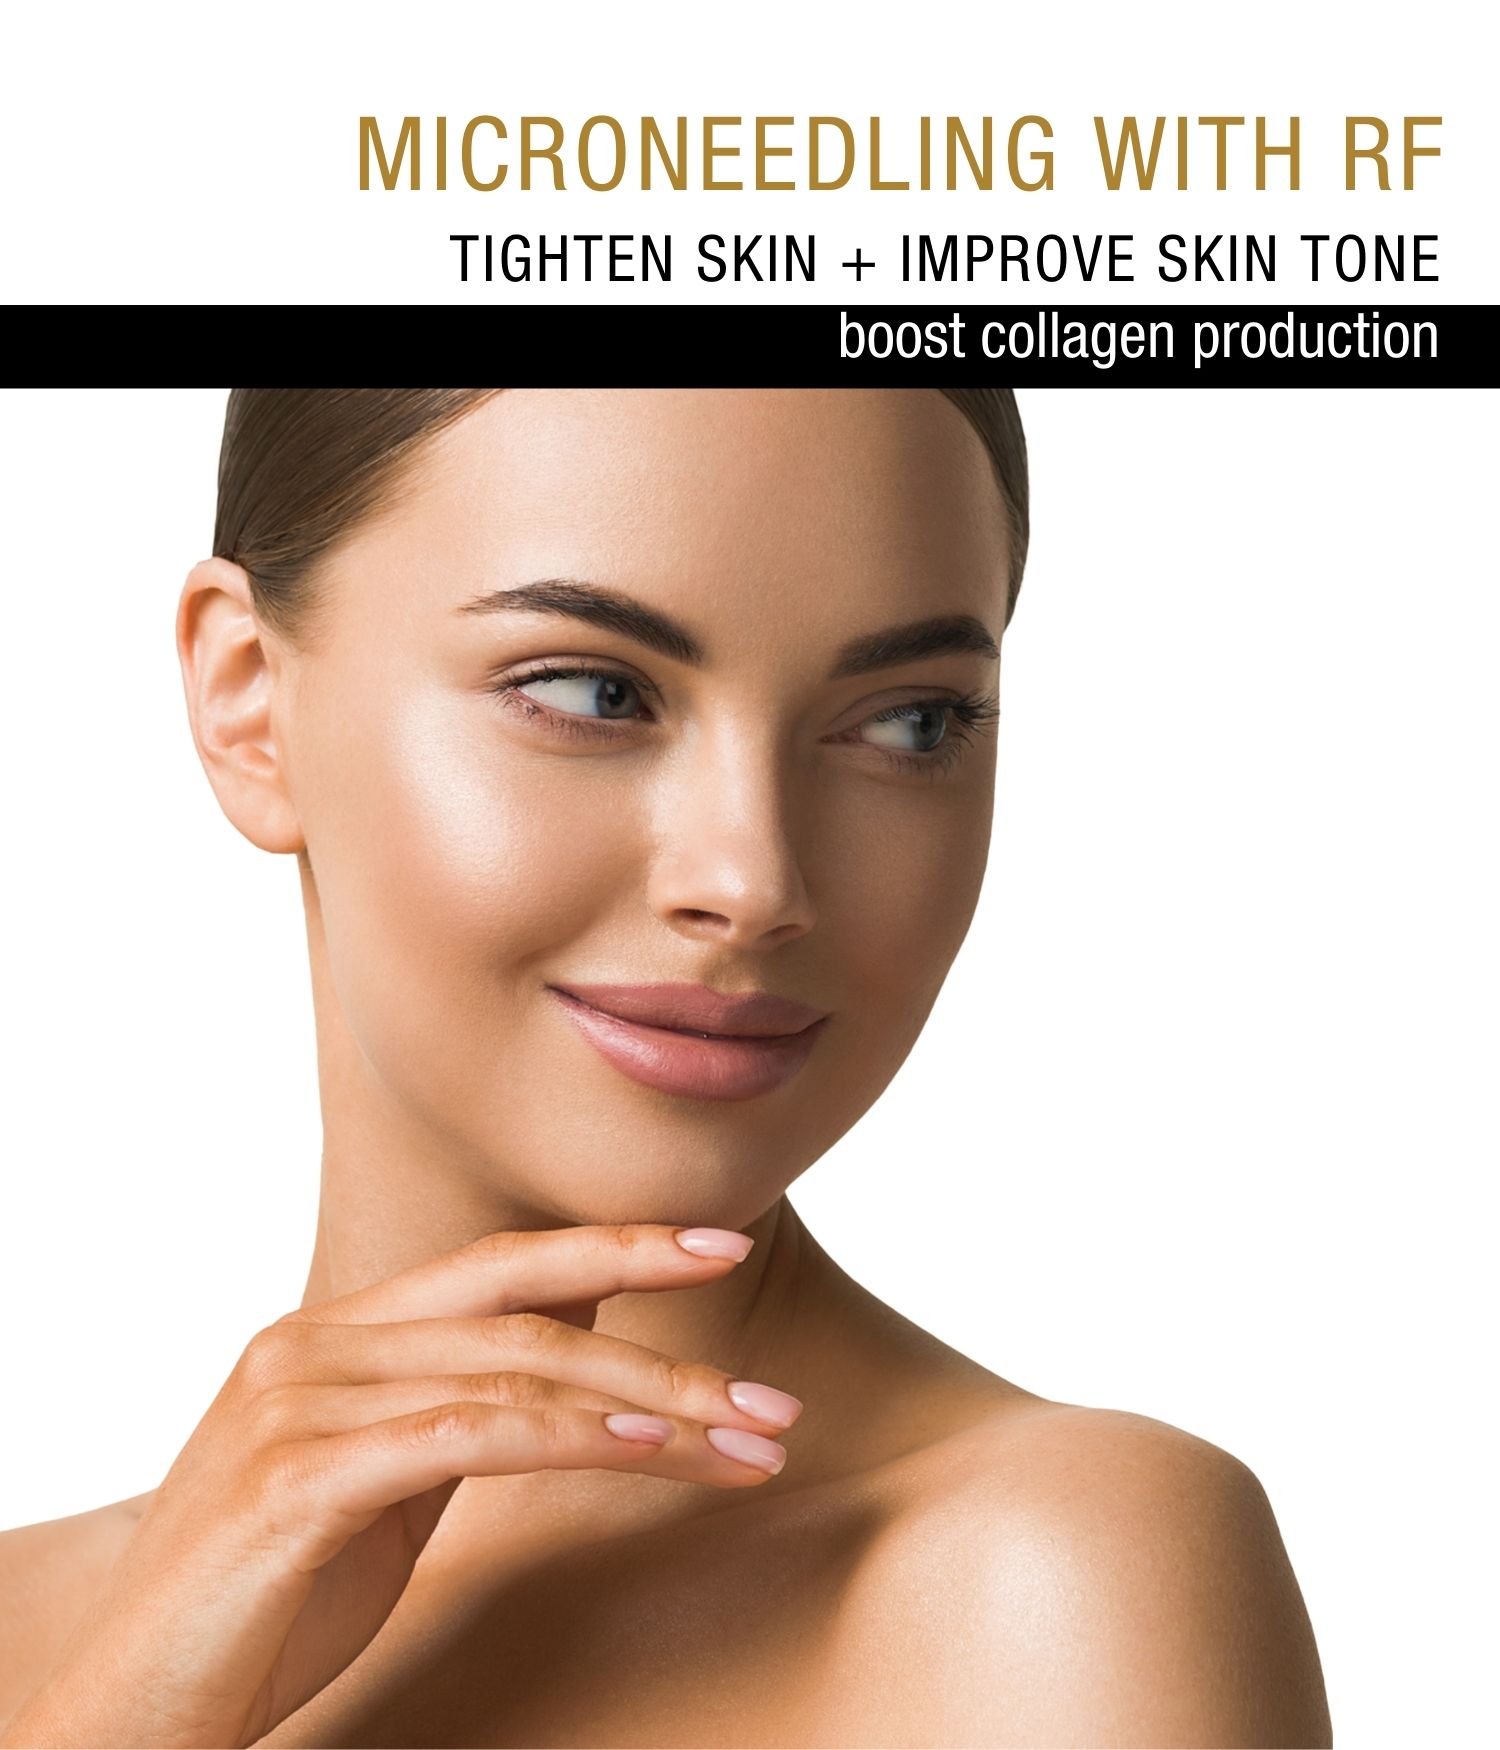 Woman with rejuvenated skin promoting a Morpheus 8 RF Microneedling